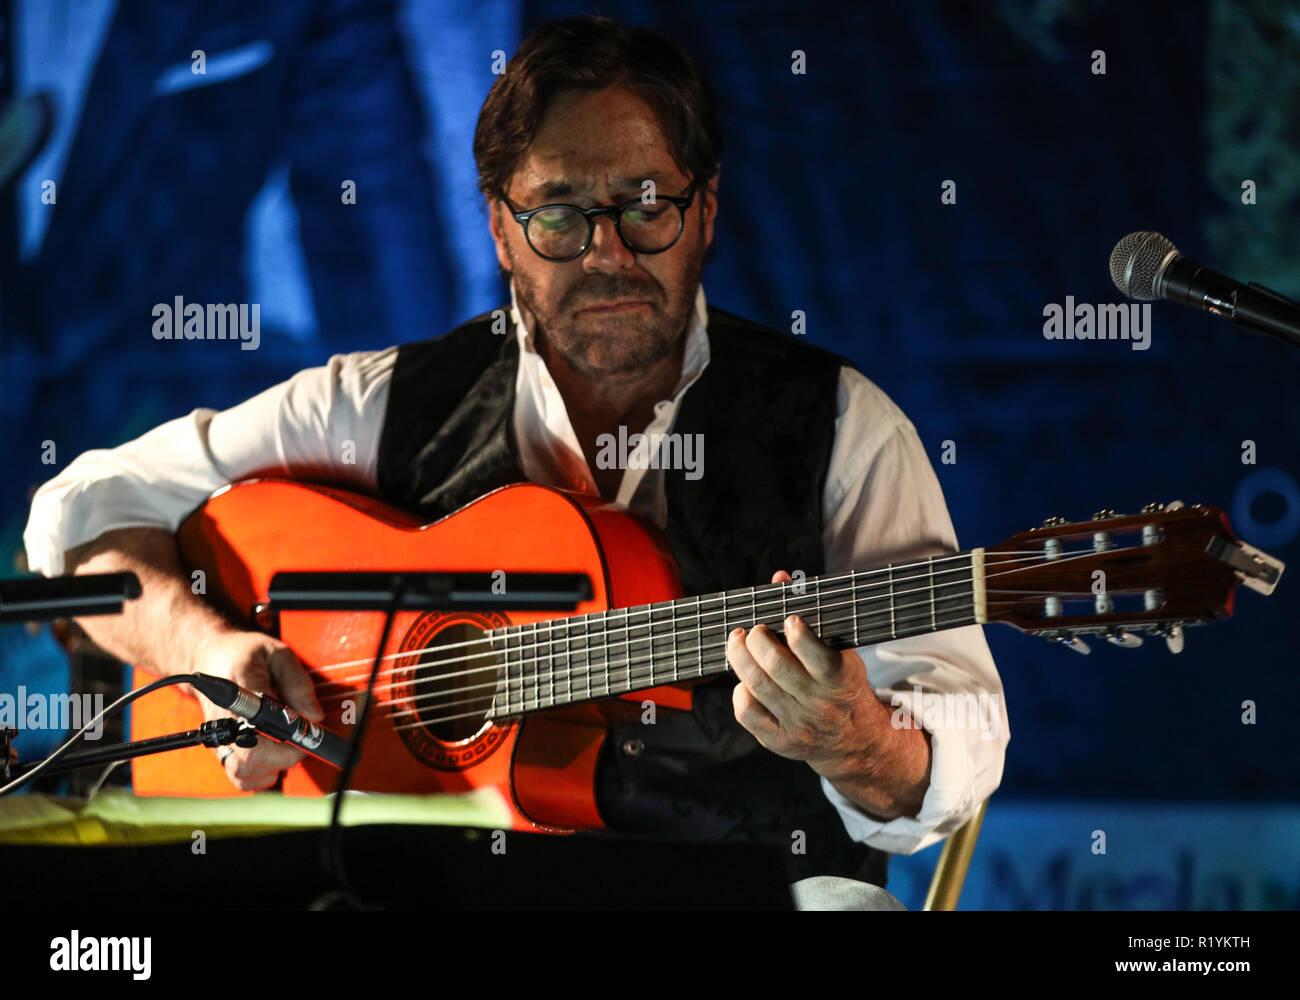 Cracow, Poland - November 2, 2018: American jazz fusion and Latin jazz guitarist Al Di Meola performing live on the Kijow.Centre stage in Krakow, Pola Stock Photo